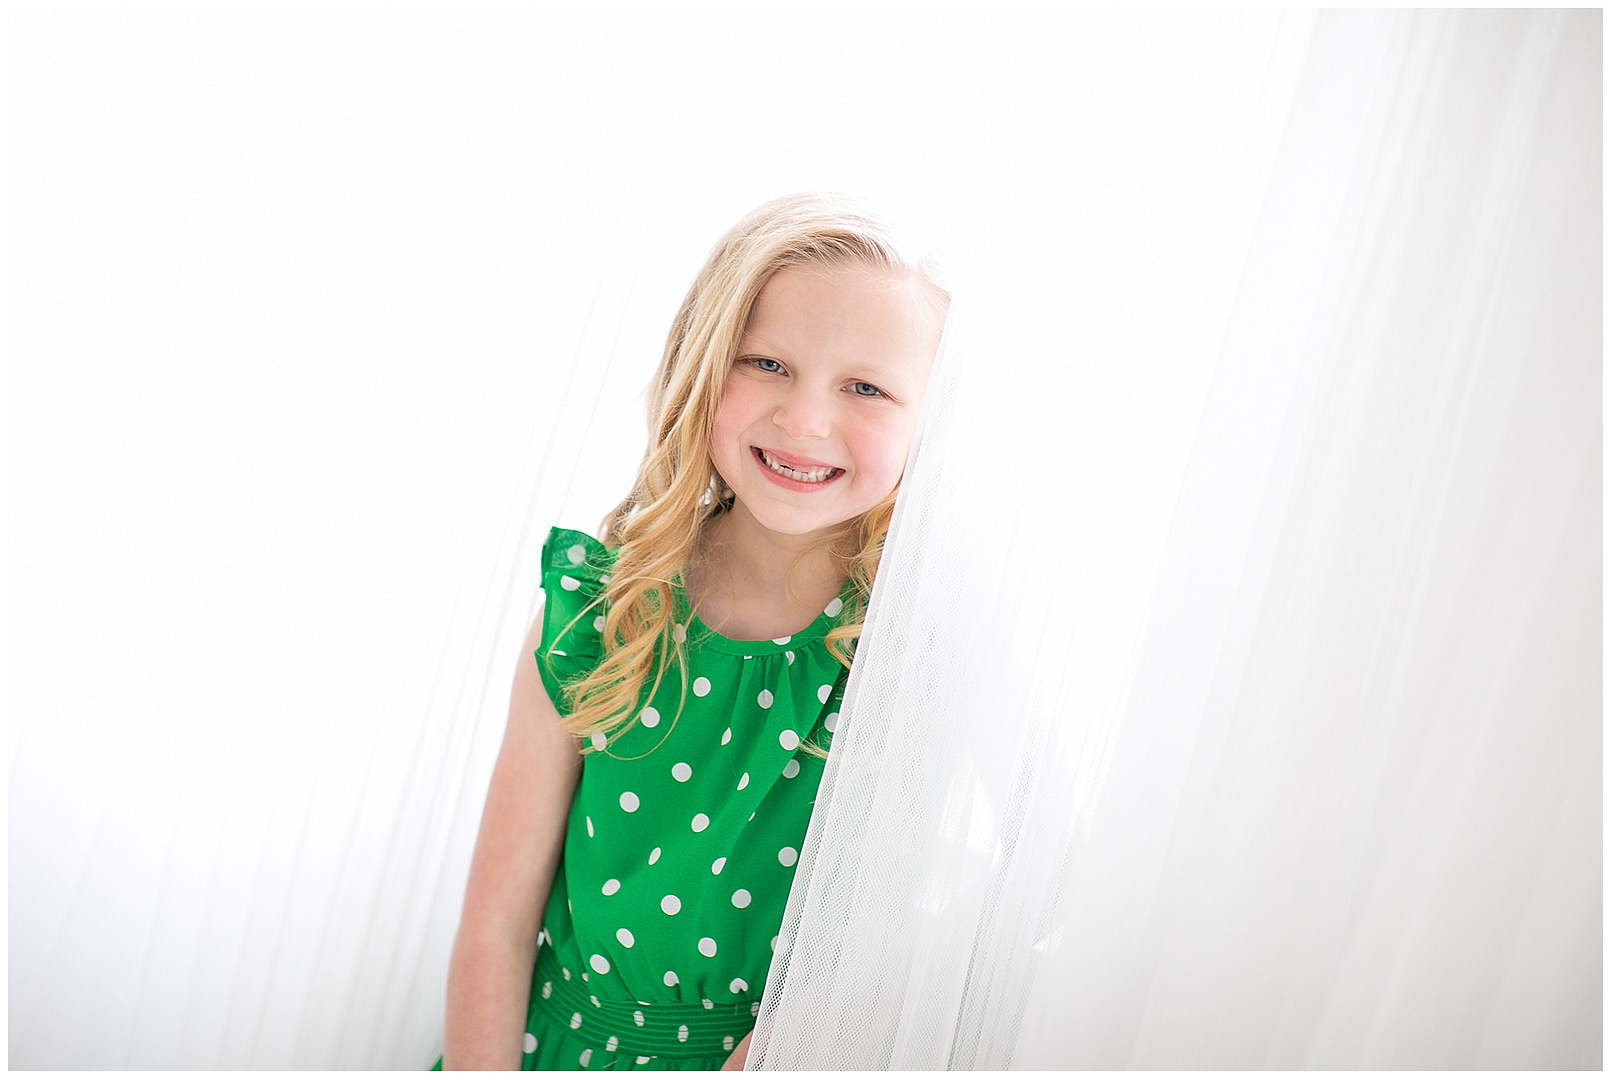 Girl smiles behind curtain. Photos by Tiffany Hix Photography.